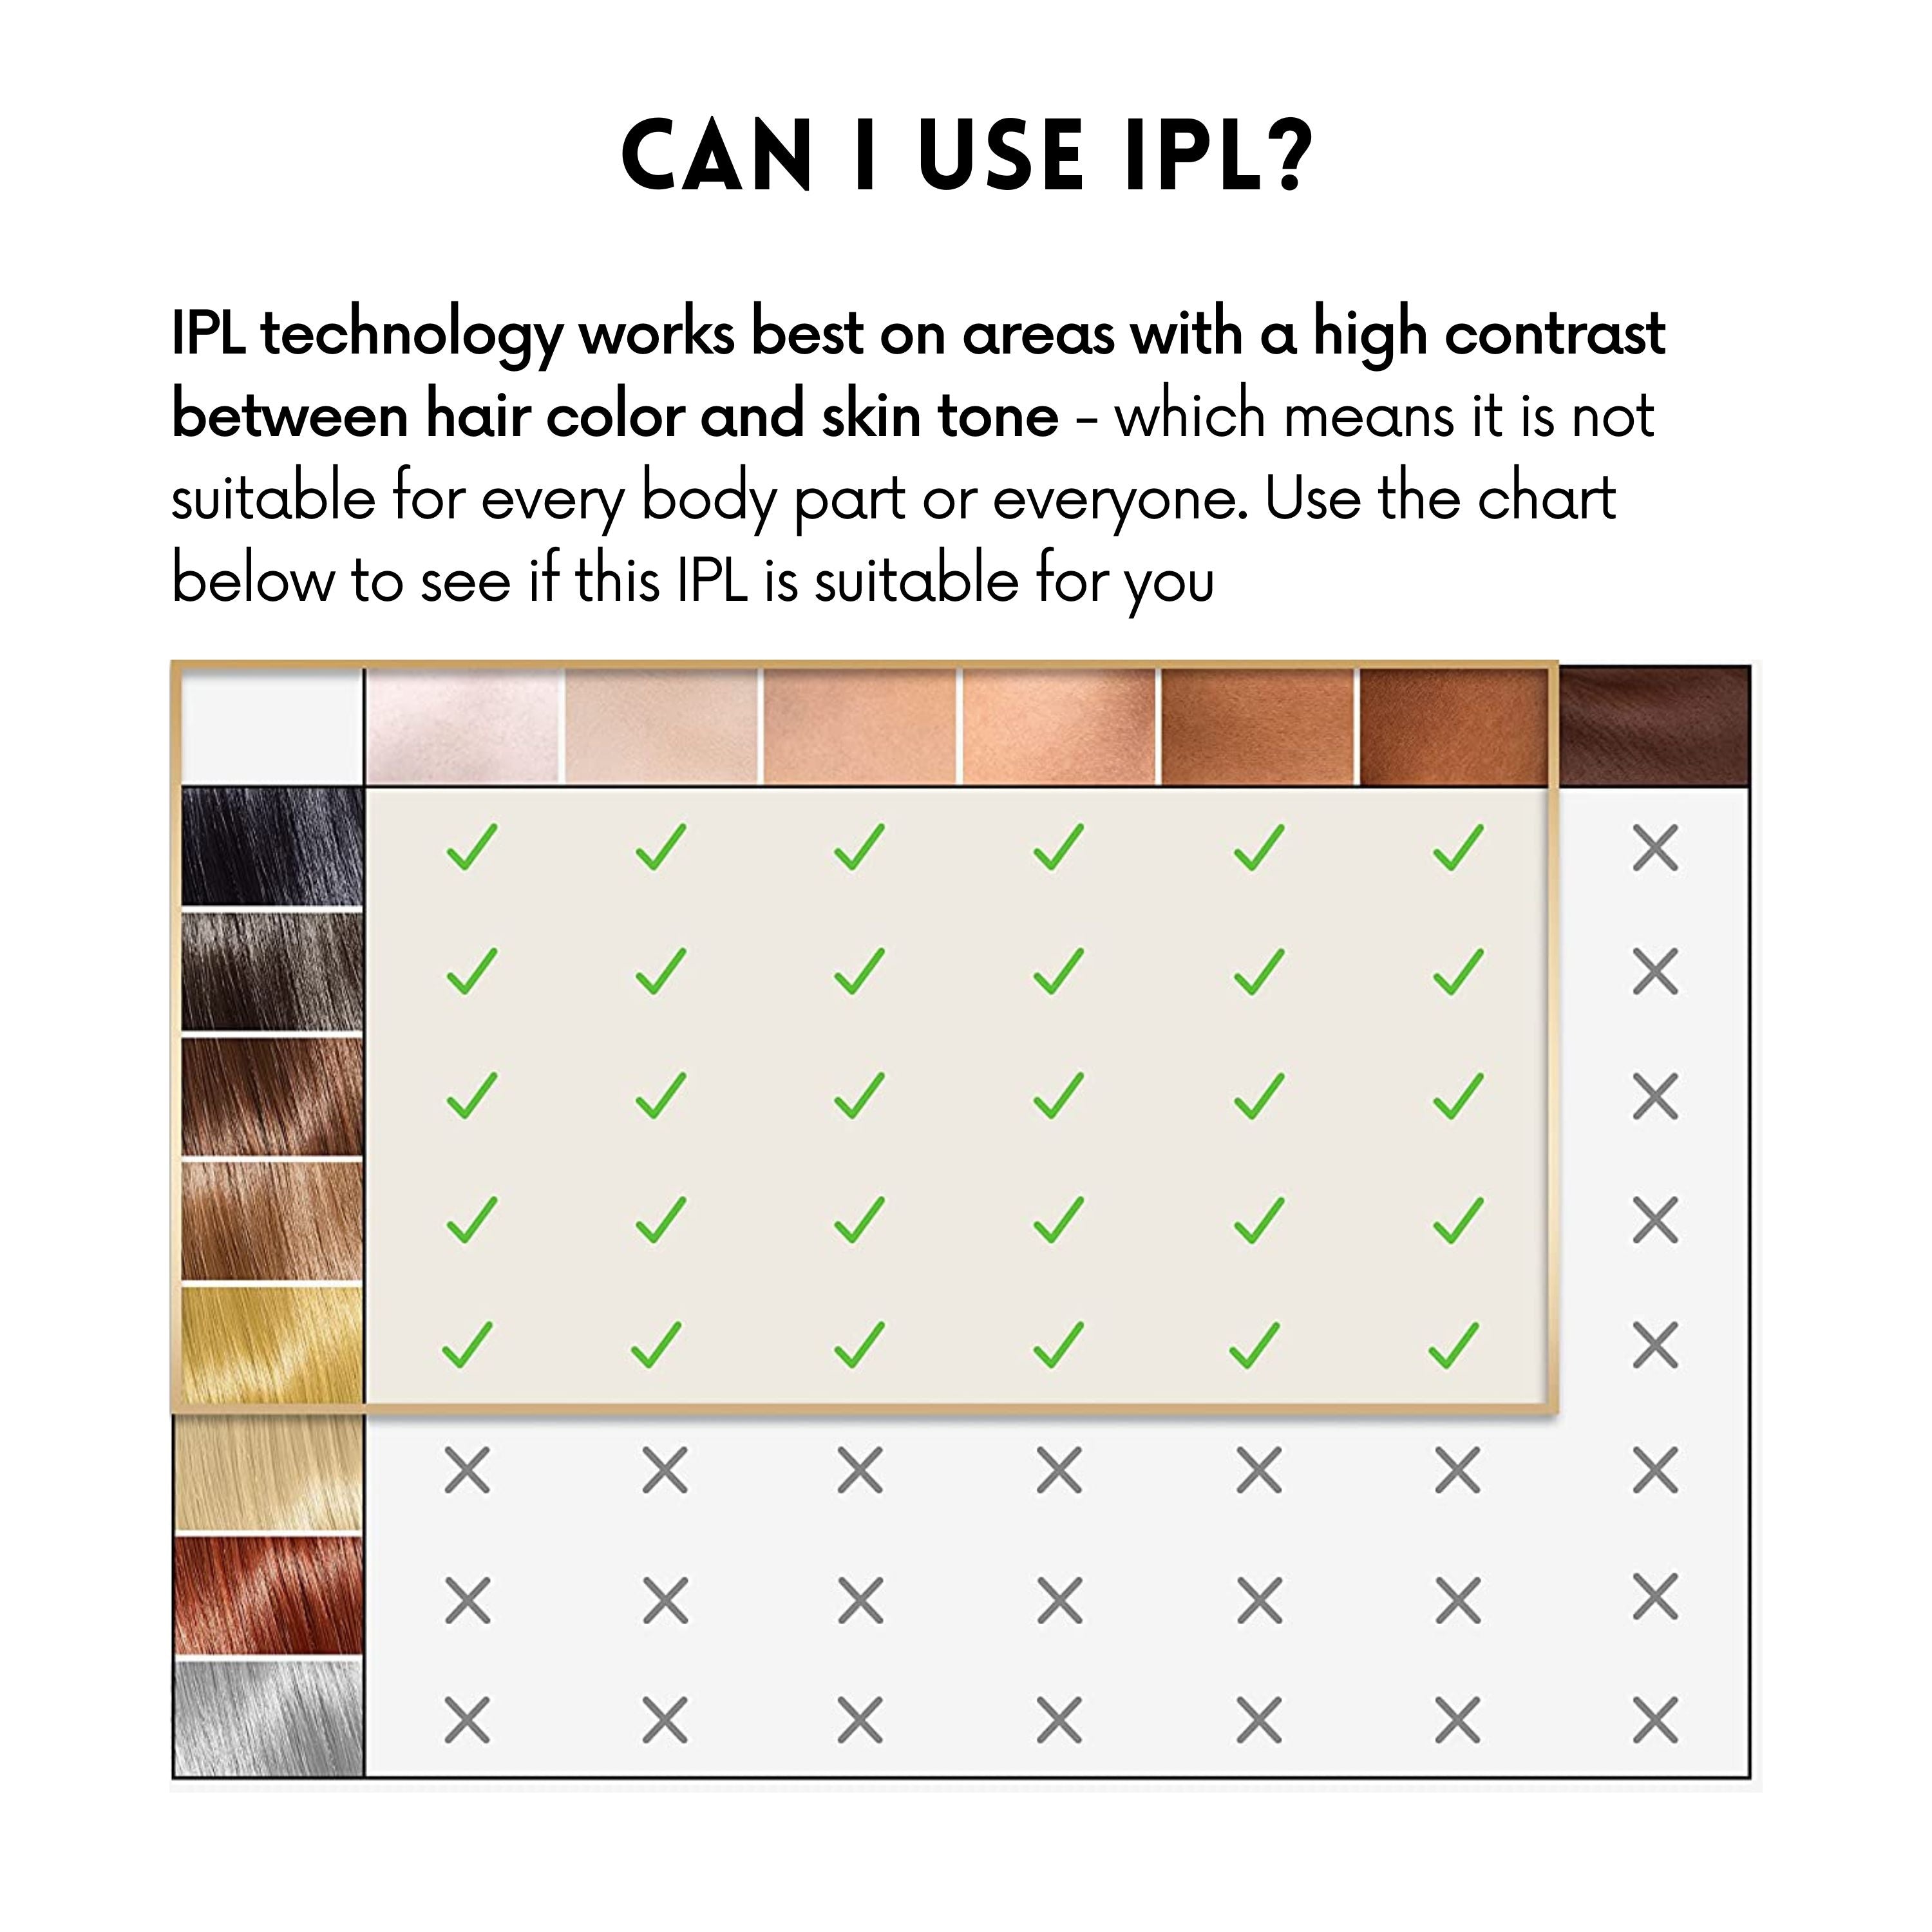 Is IPL Suitable for me? Can I use IPL Handset At-Home? - My Sheen Skin.  IPL technology works best on areas with a high contrast between hair color and skin tone - which means it is not suitable for every body part or everyone. Use the chart below to see if this IPL is suitable for you